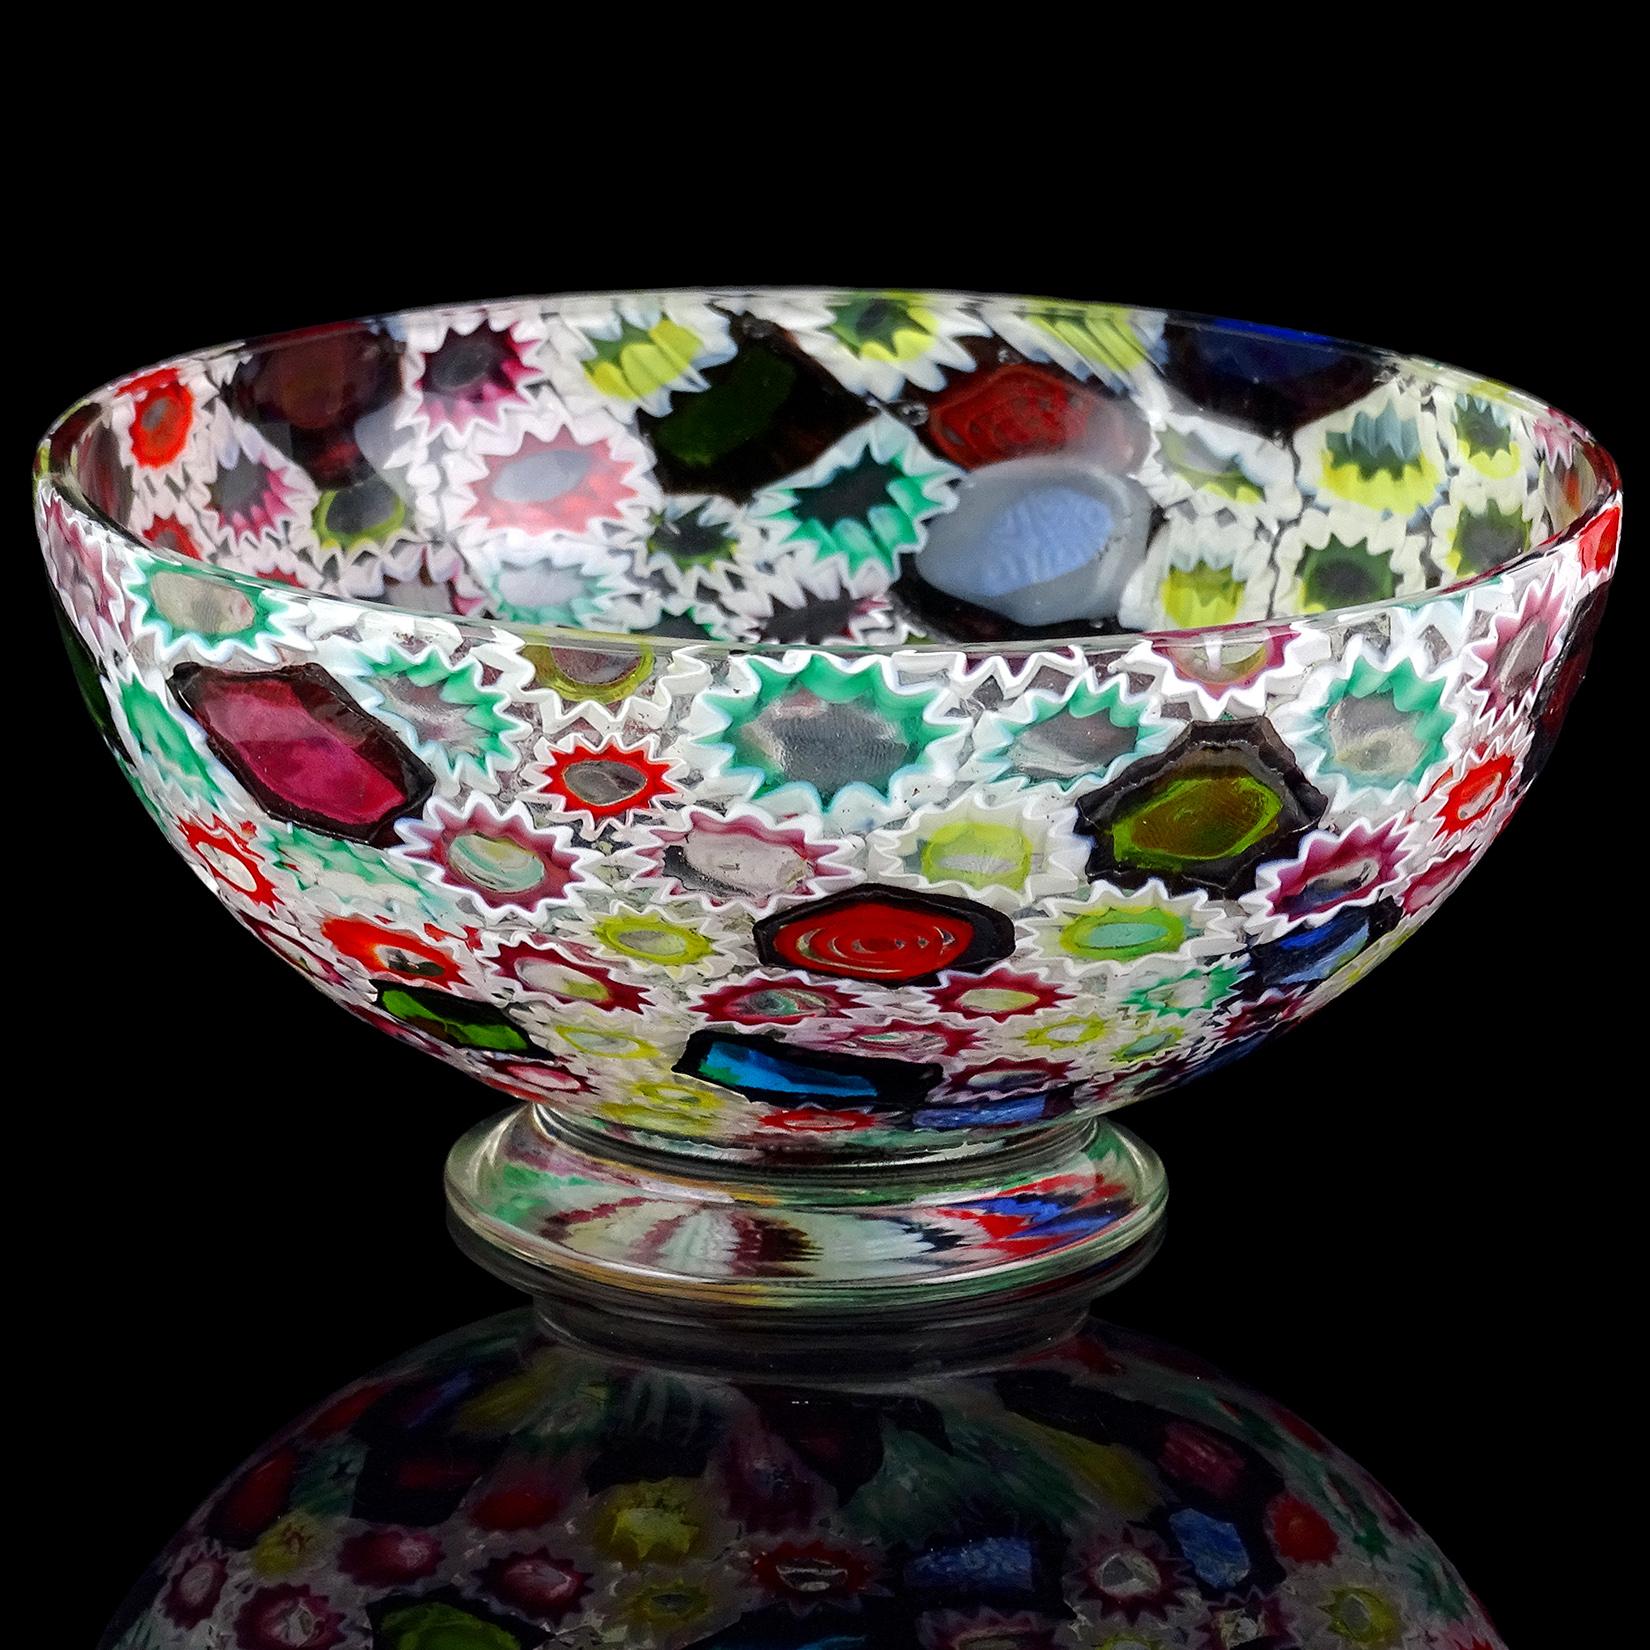 Hand-Crafted Fratelli Toso Murano Millefiori Flower Star Mosaic Italian Art Glass Footed Bowl